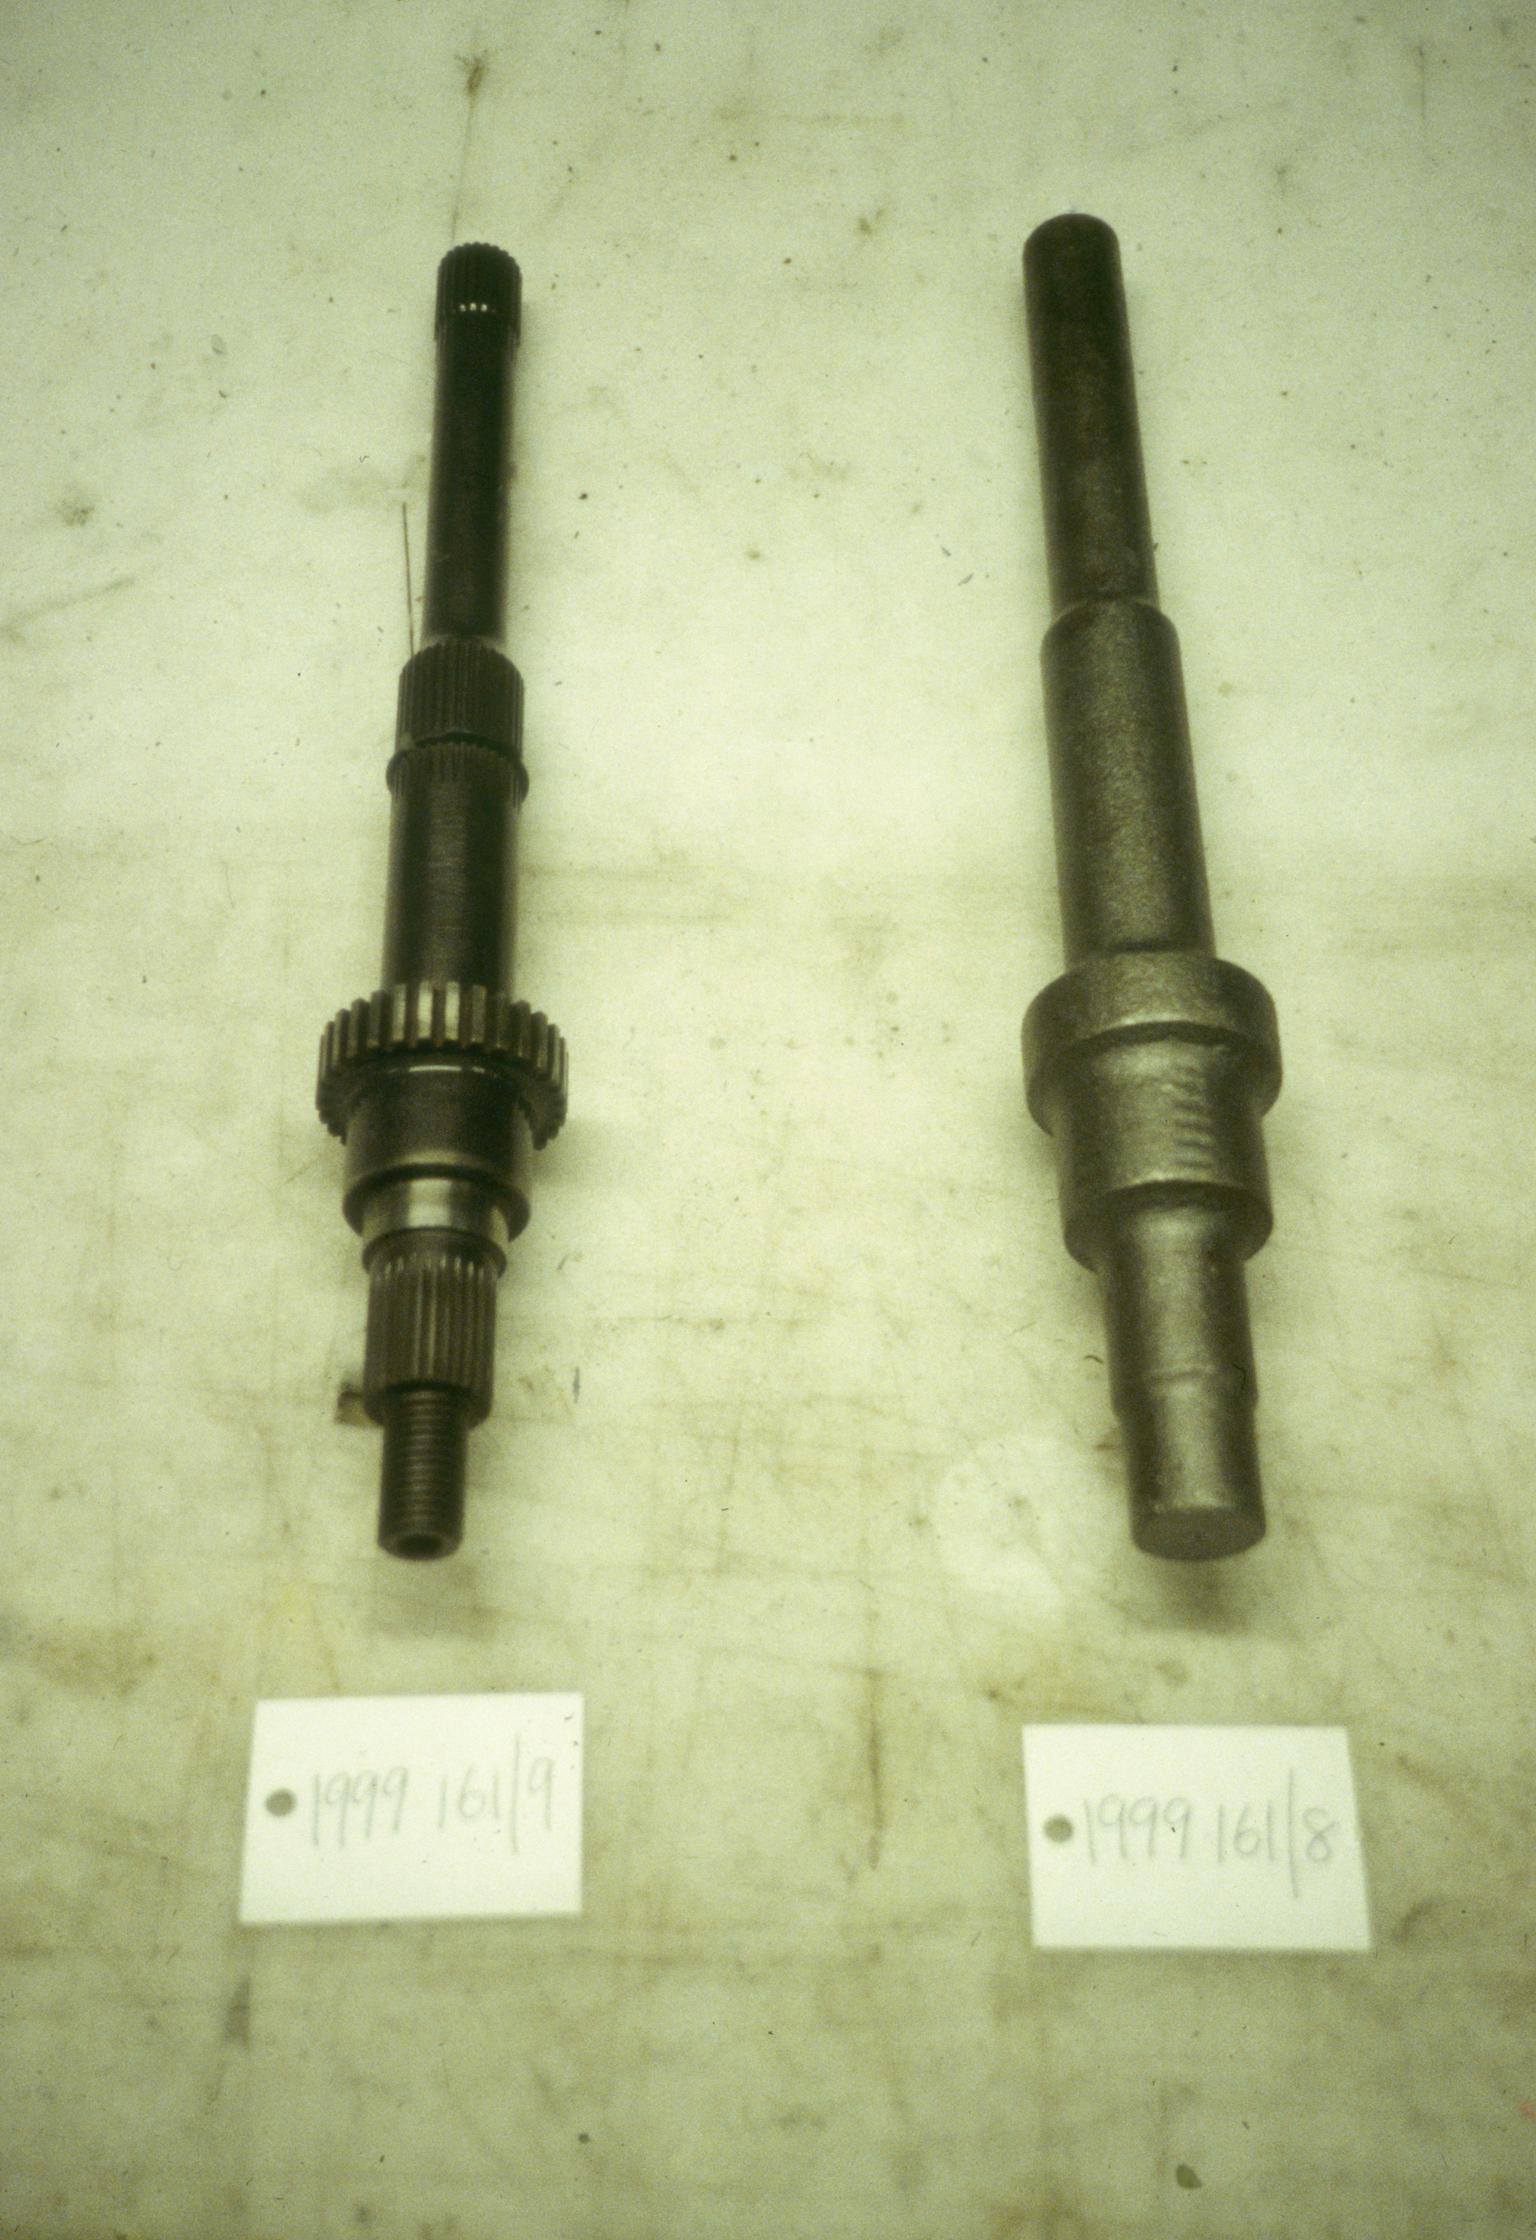 Rough casting & machined casting for a drive shaft